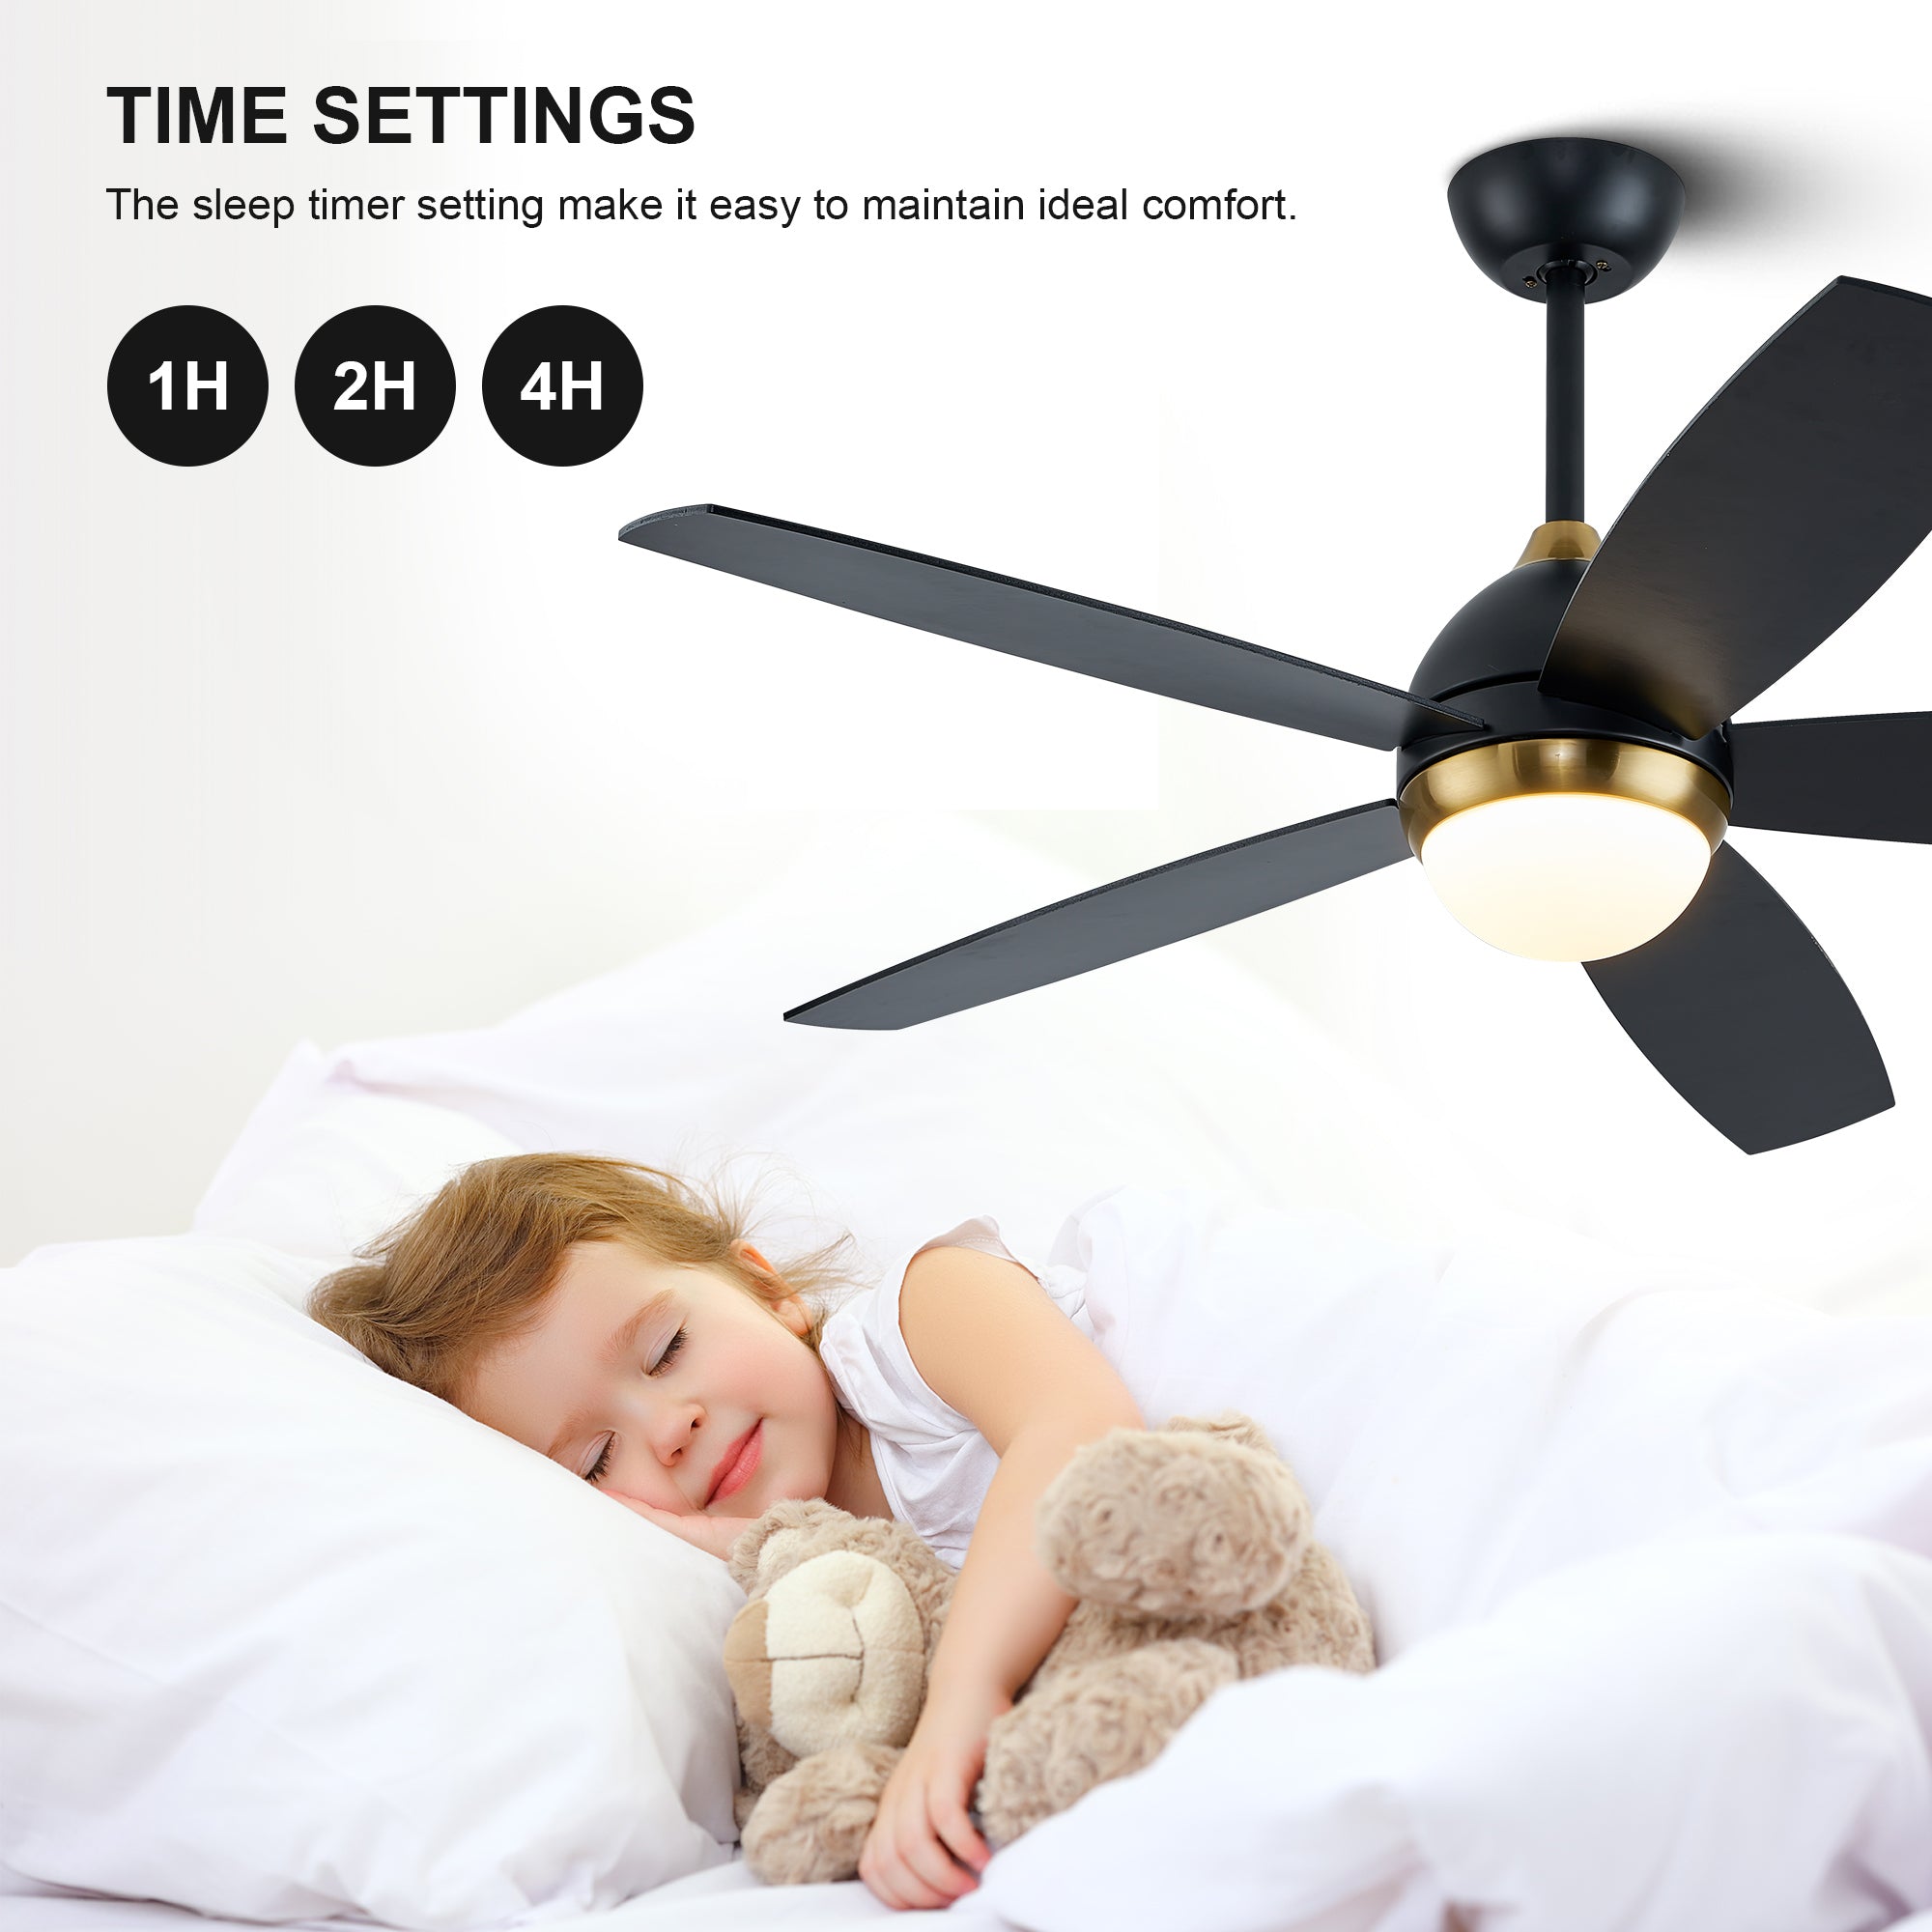 52 Inch Black Ceiling Fan with Lights black-abs-metal